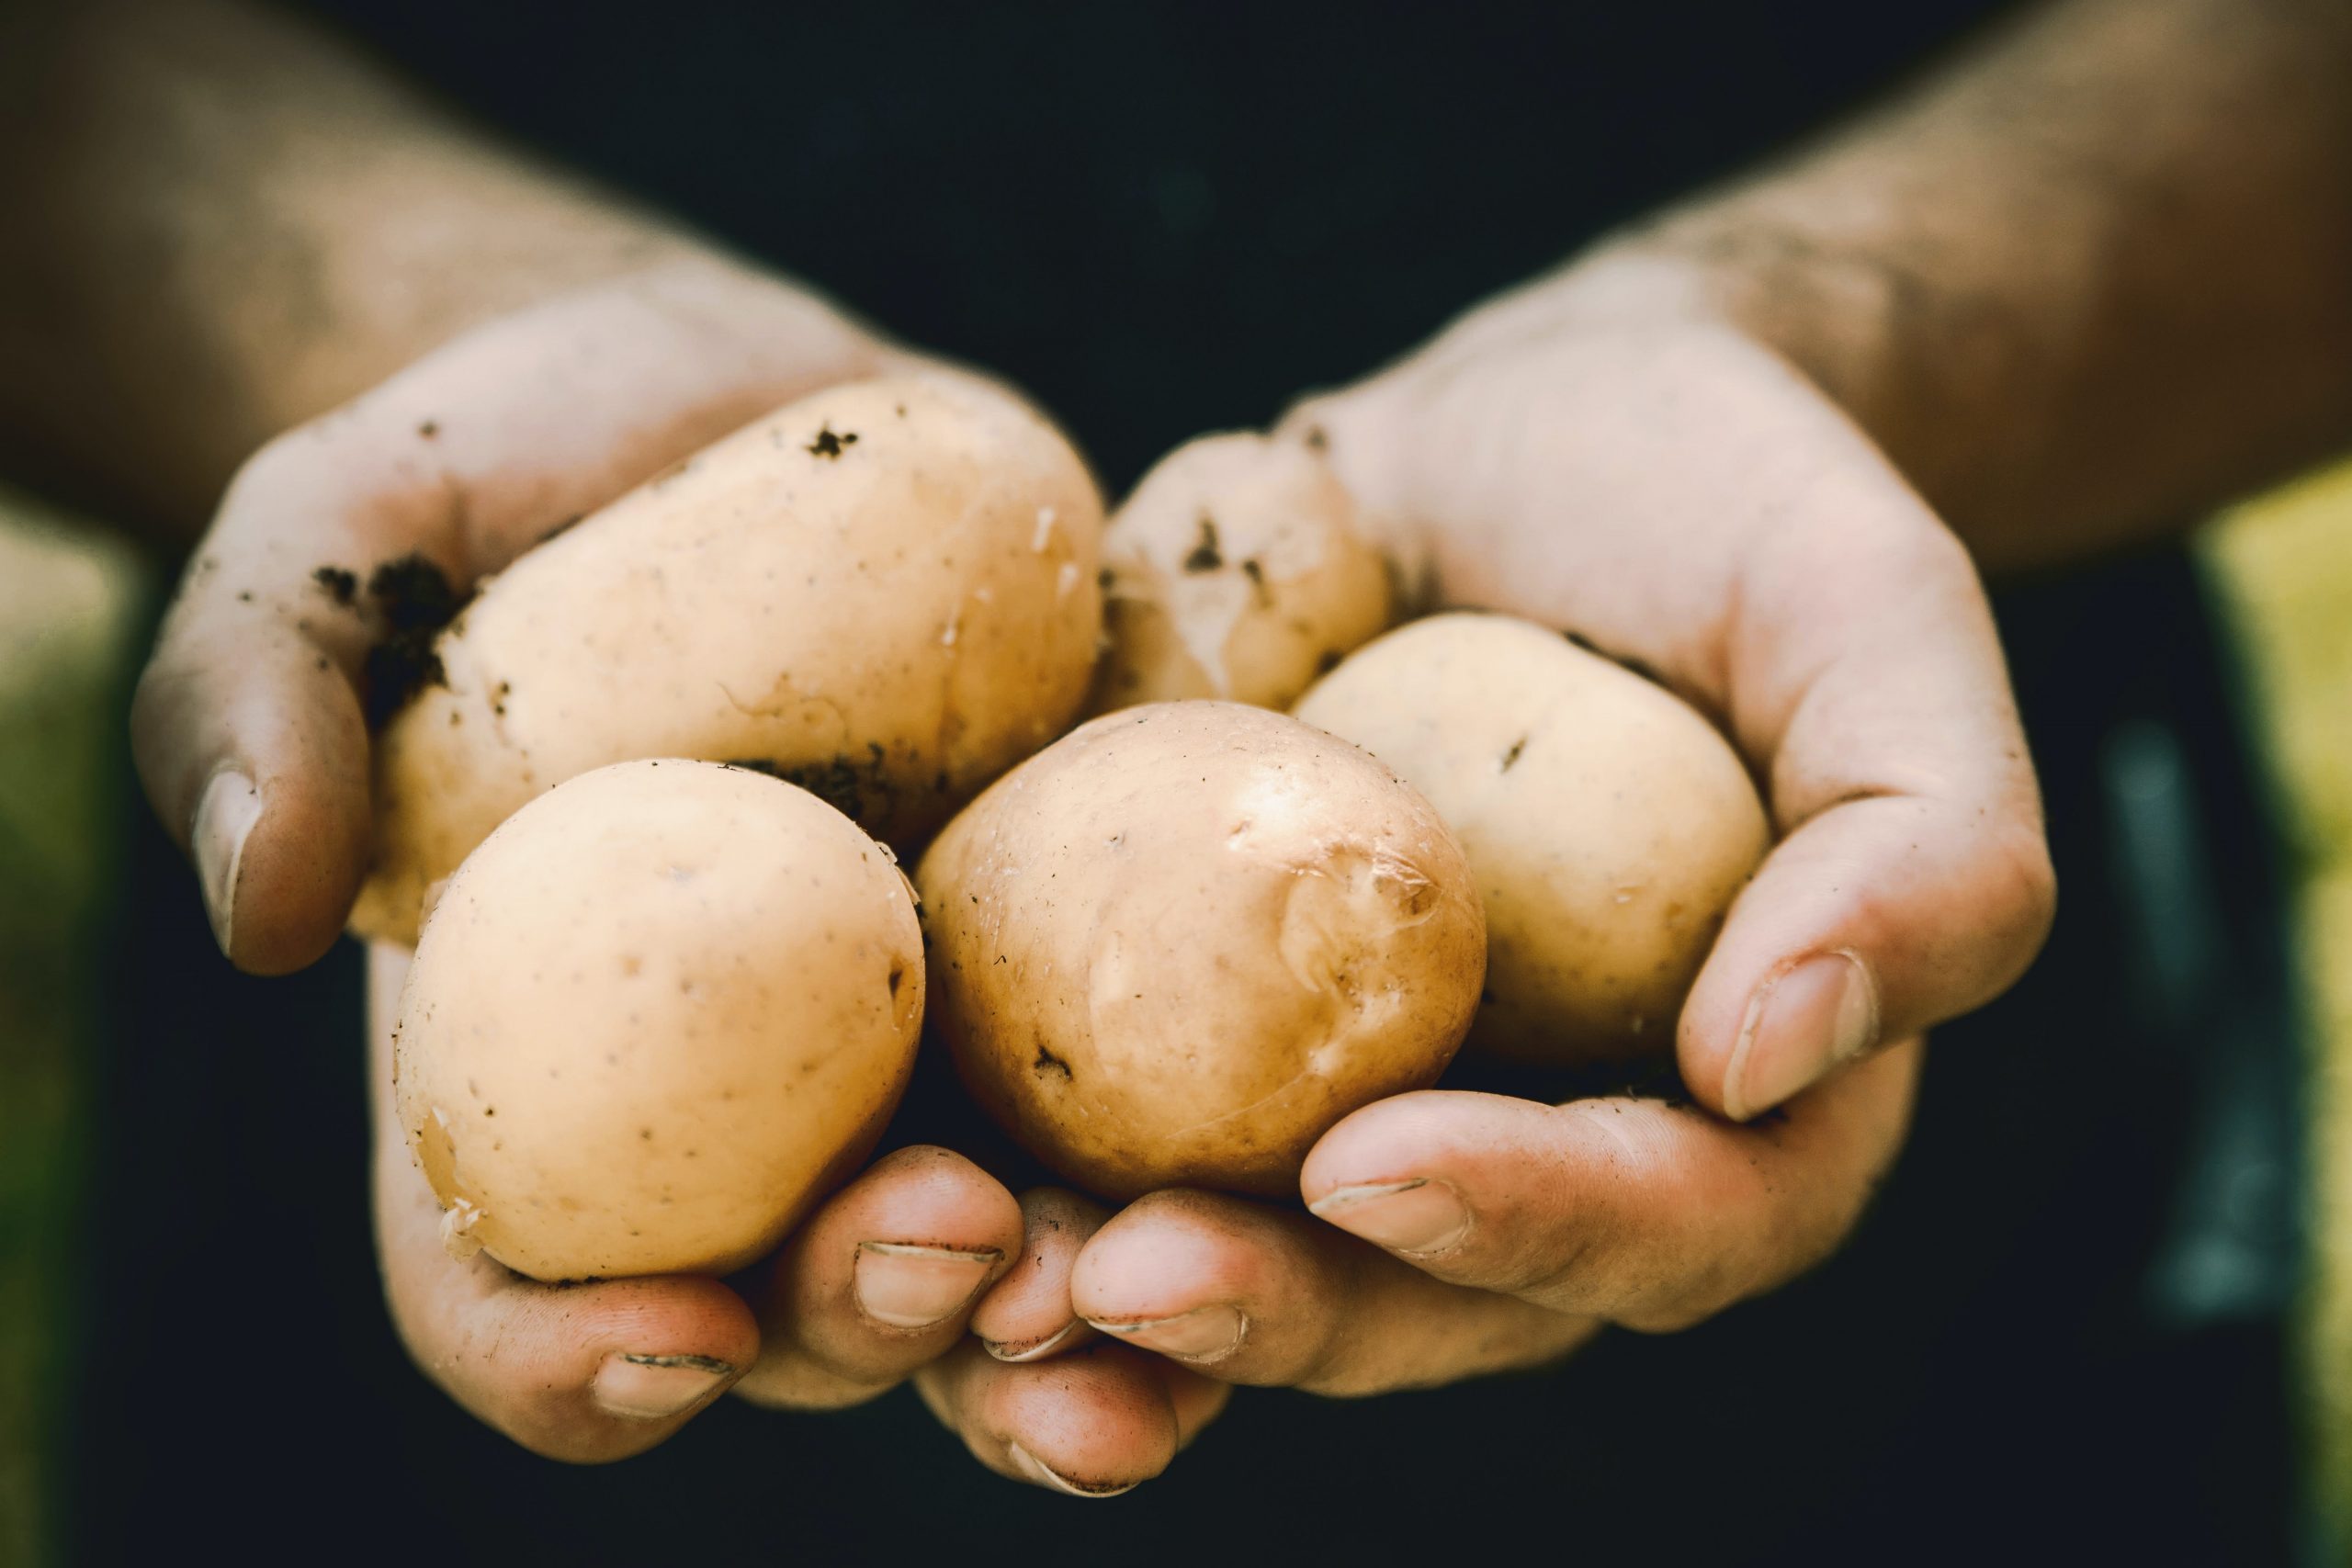 Can Potatoes Be A Part Of A Six Pack Abs Diet?